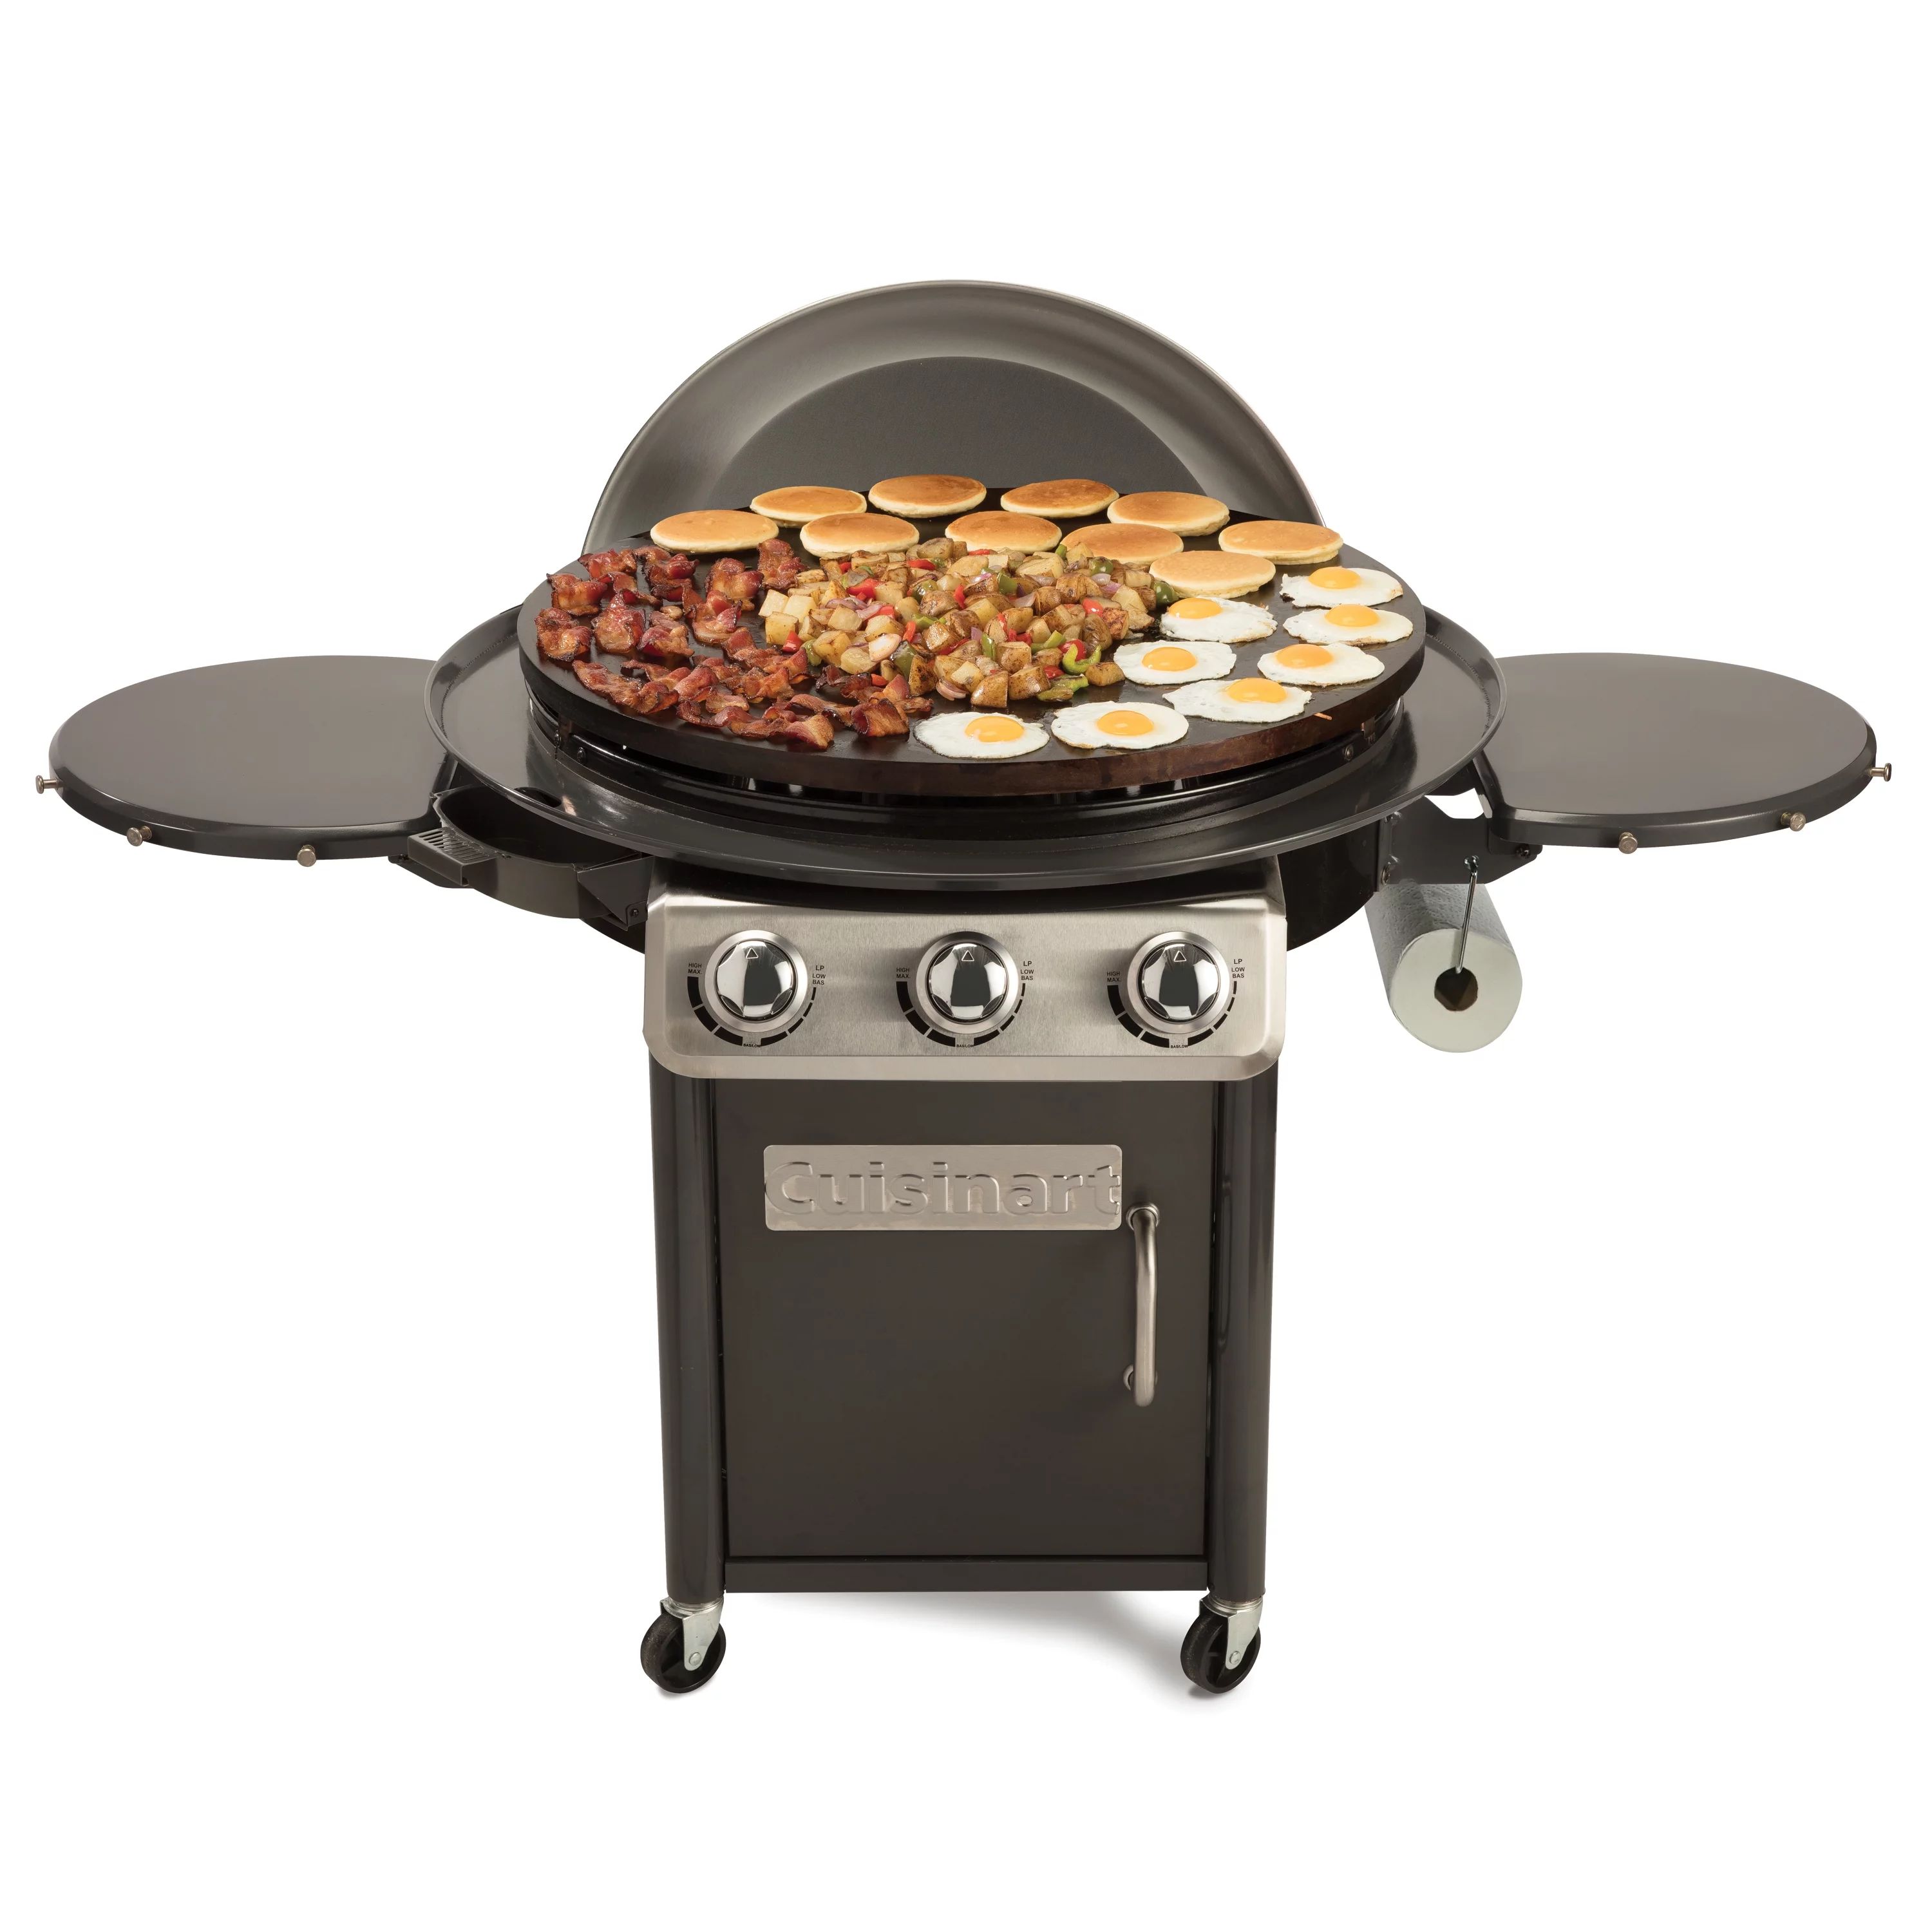 360 XL Griddle Outdoor Cooking Station, Cooking Versatility! | Walmart (US)